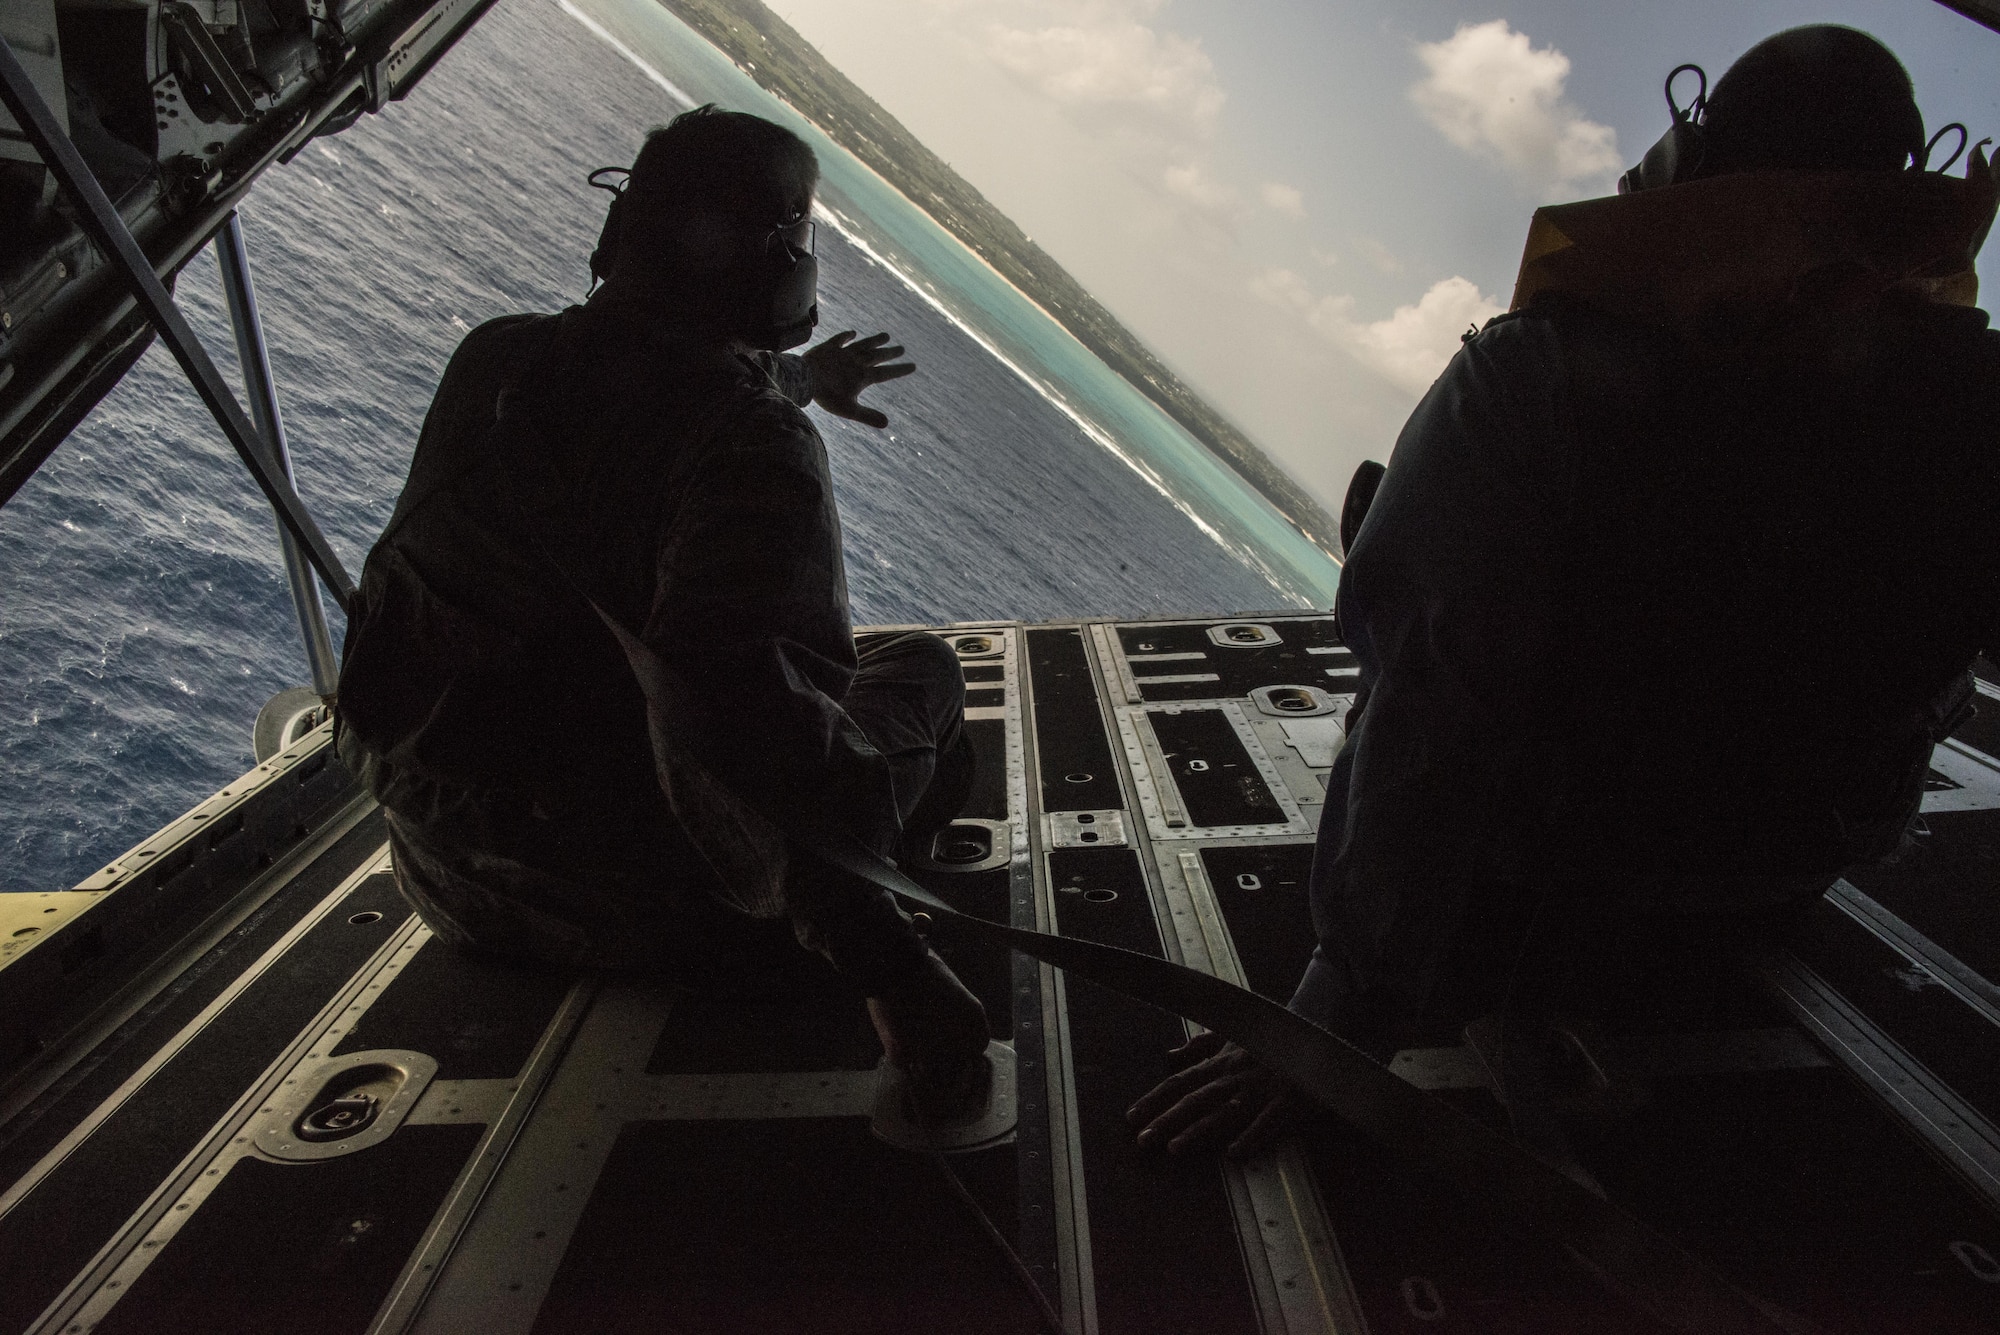 U.S. Air Force Lt. Gen. Brad Webb, commander of Air Force Special Operations Command, looks out the back of an MC-130J Commando II during an island tour of Okinawa, Japan, Nov. 7, 2016. Webb flew on the MC-130J as a part of his visit to the 353rd Special Operations Group. (U.S. Air Force photo by Capt. Jessica Tait)